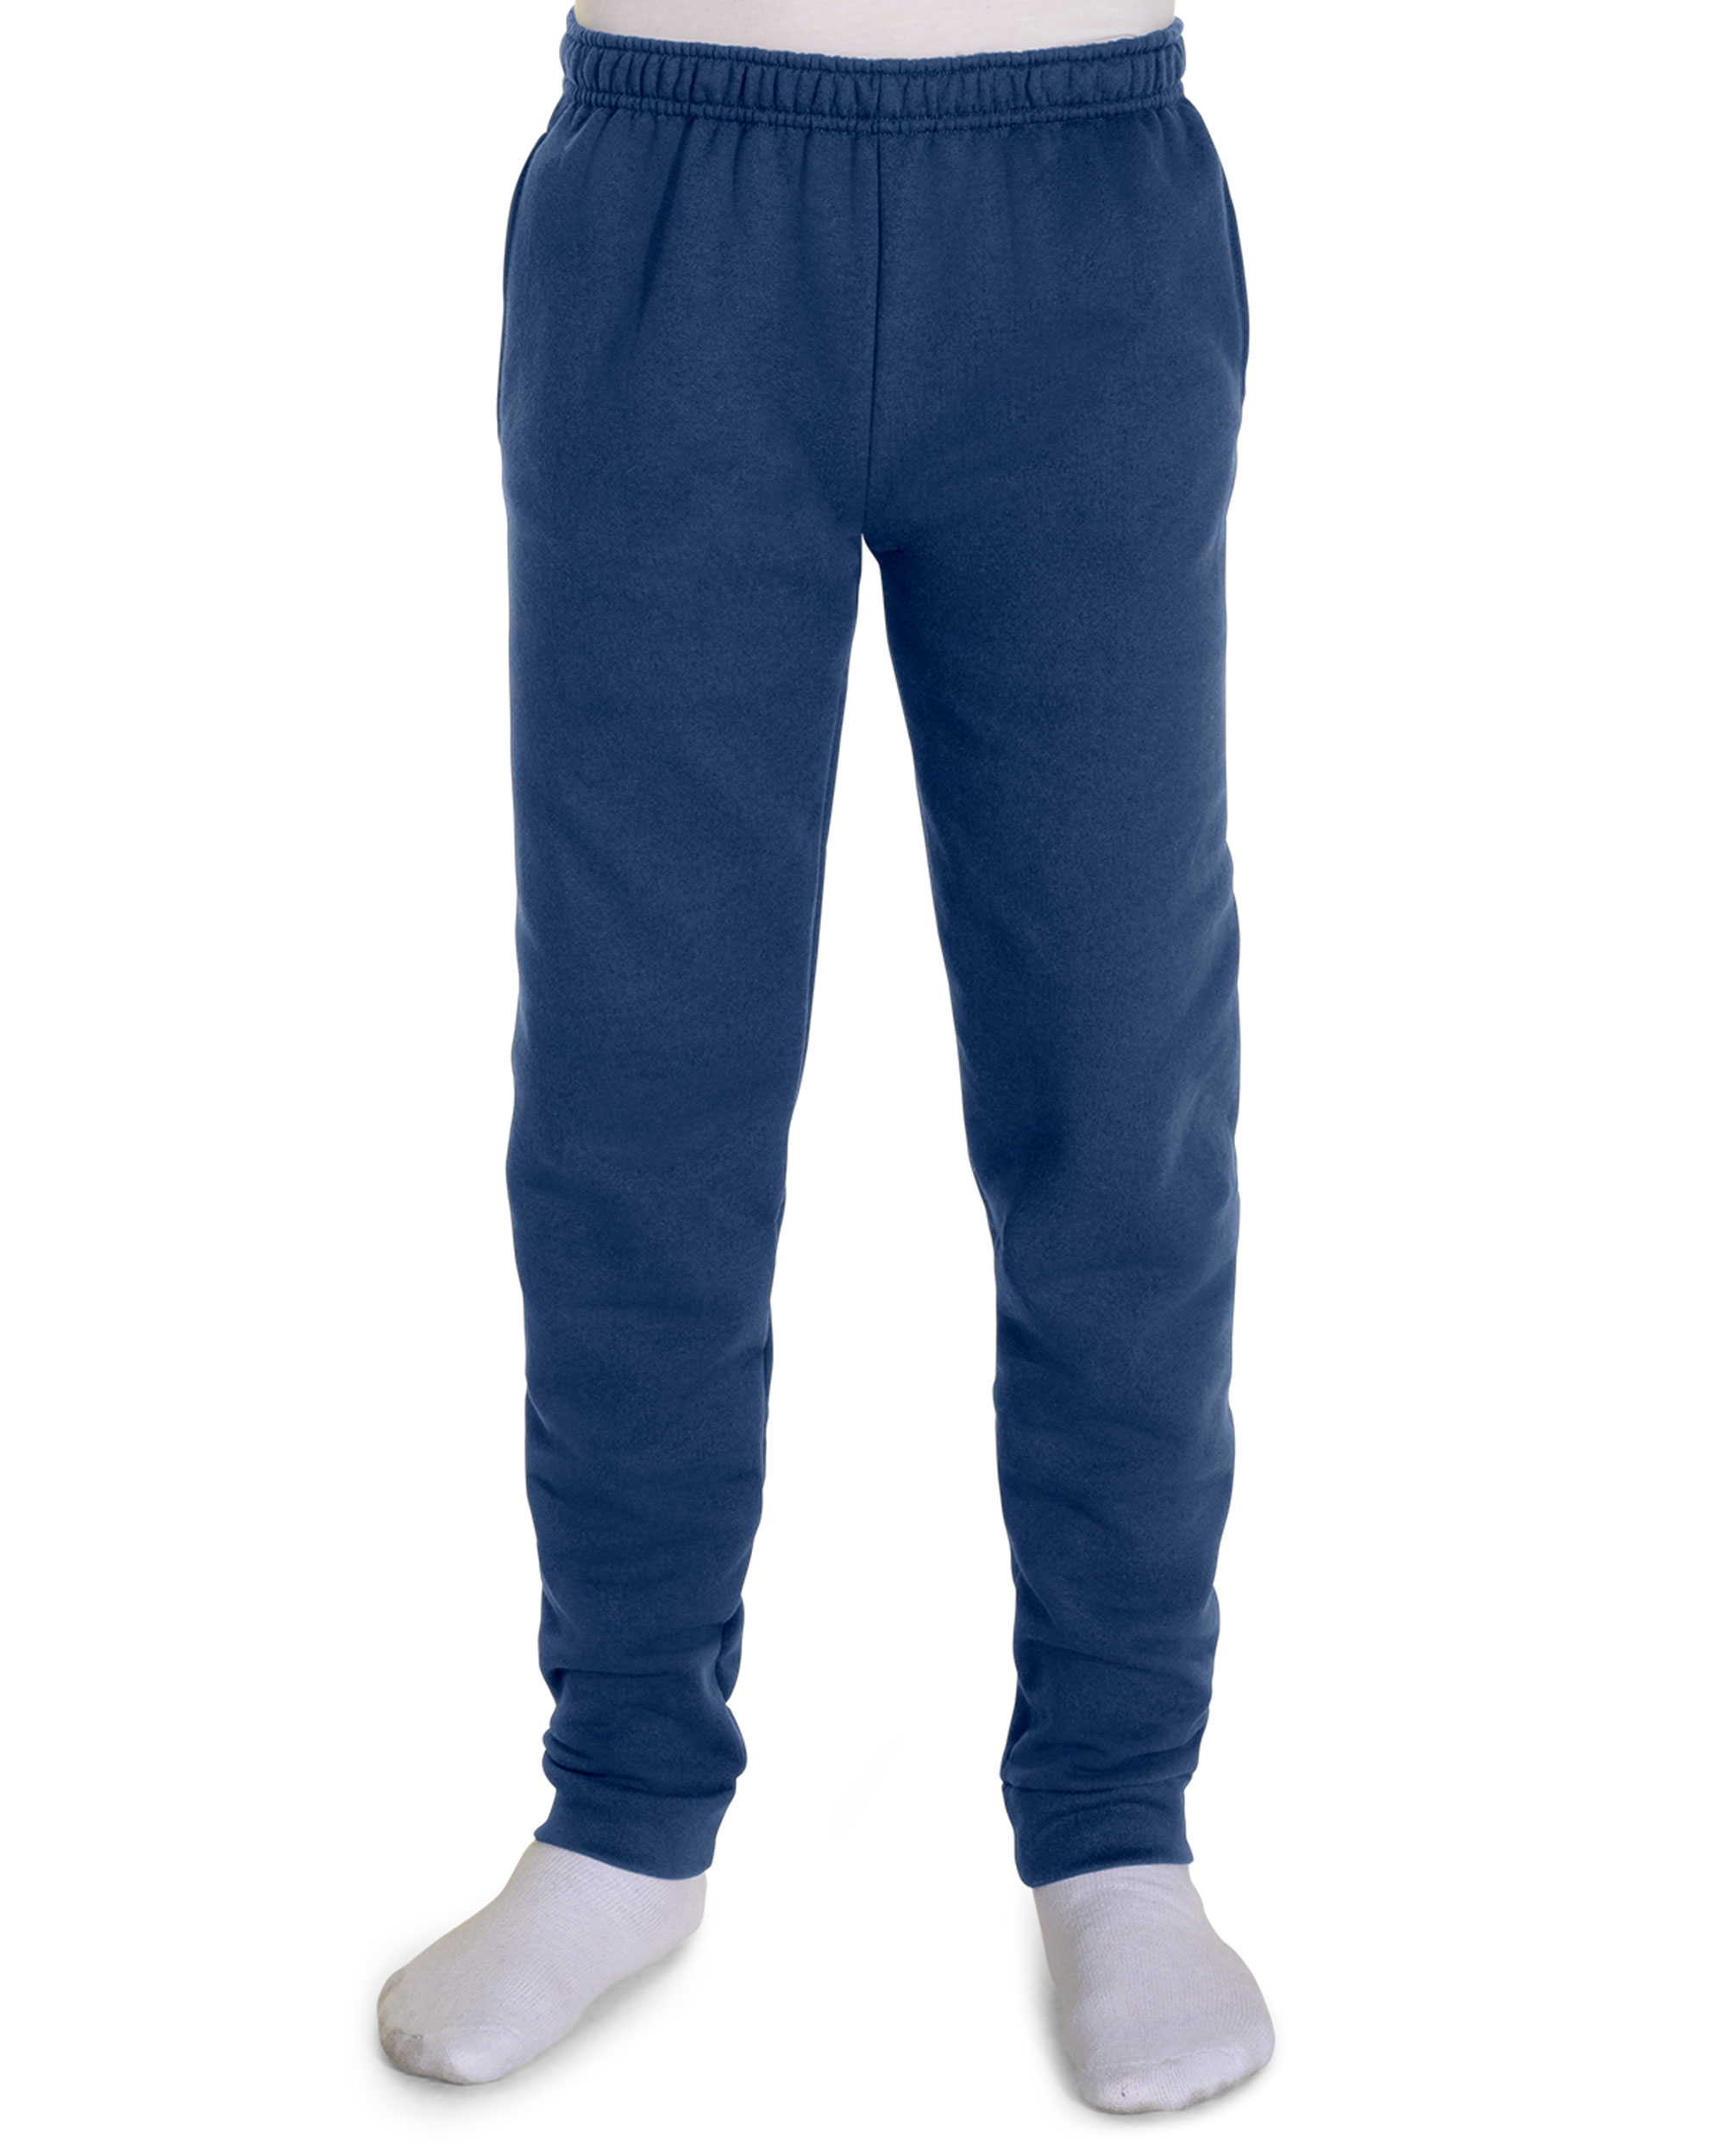 JERZEES® 975YR NuBlend® Youth Pocketed Jogger Sweatpants